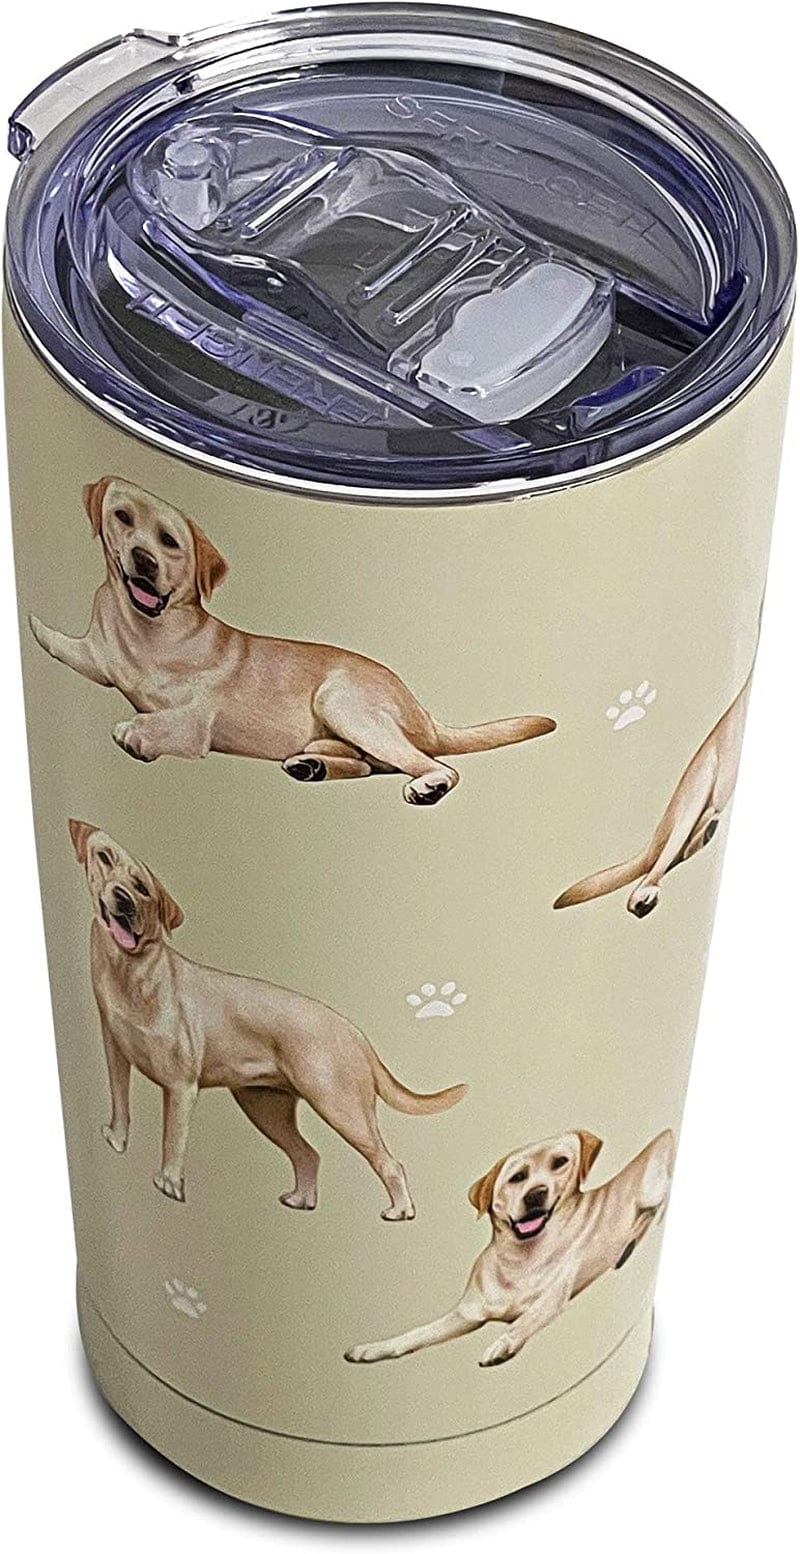 Australian Shepherd SERENGETI 16 Oz. Stainless Steel, Vacuum Insulated Tumbler with Spill Proof Lid - 3D Print - Insulated Travel Mug for Hot or Cold Drinks (Australian Shepherd Tumbler) Home & Garden > Kitchen & Dining > Tableware > Drinkware SERENGETI Yellow Labrador  